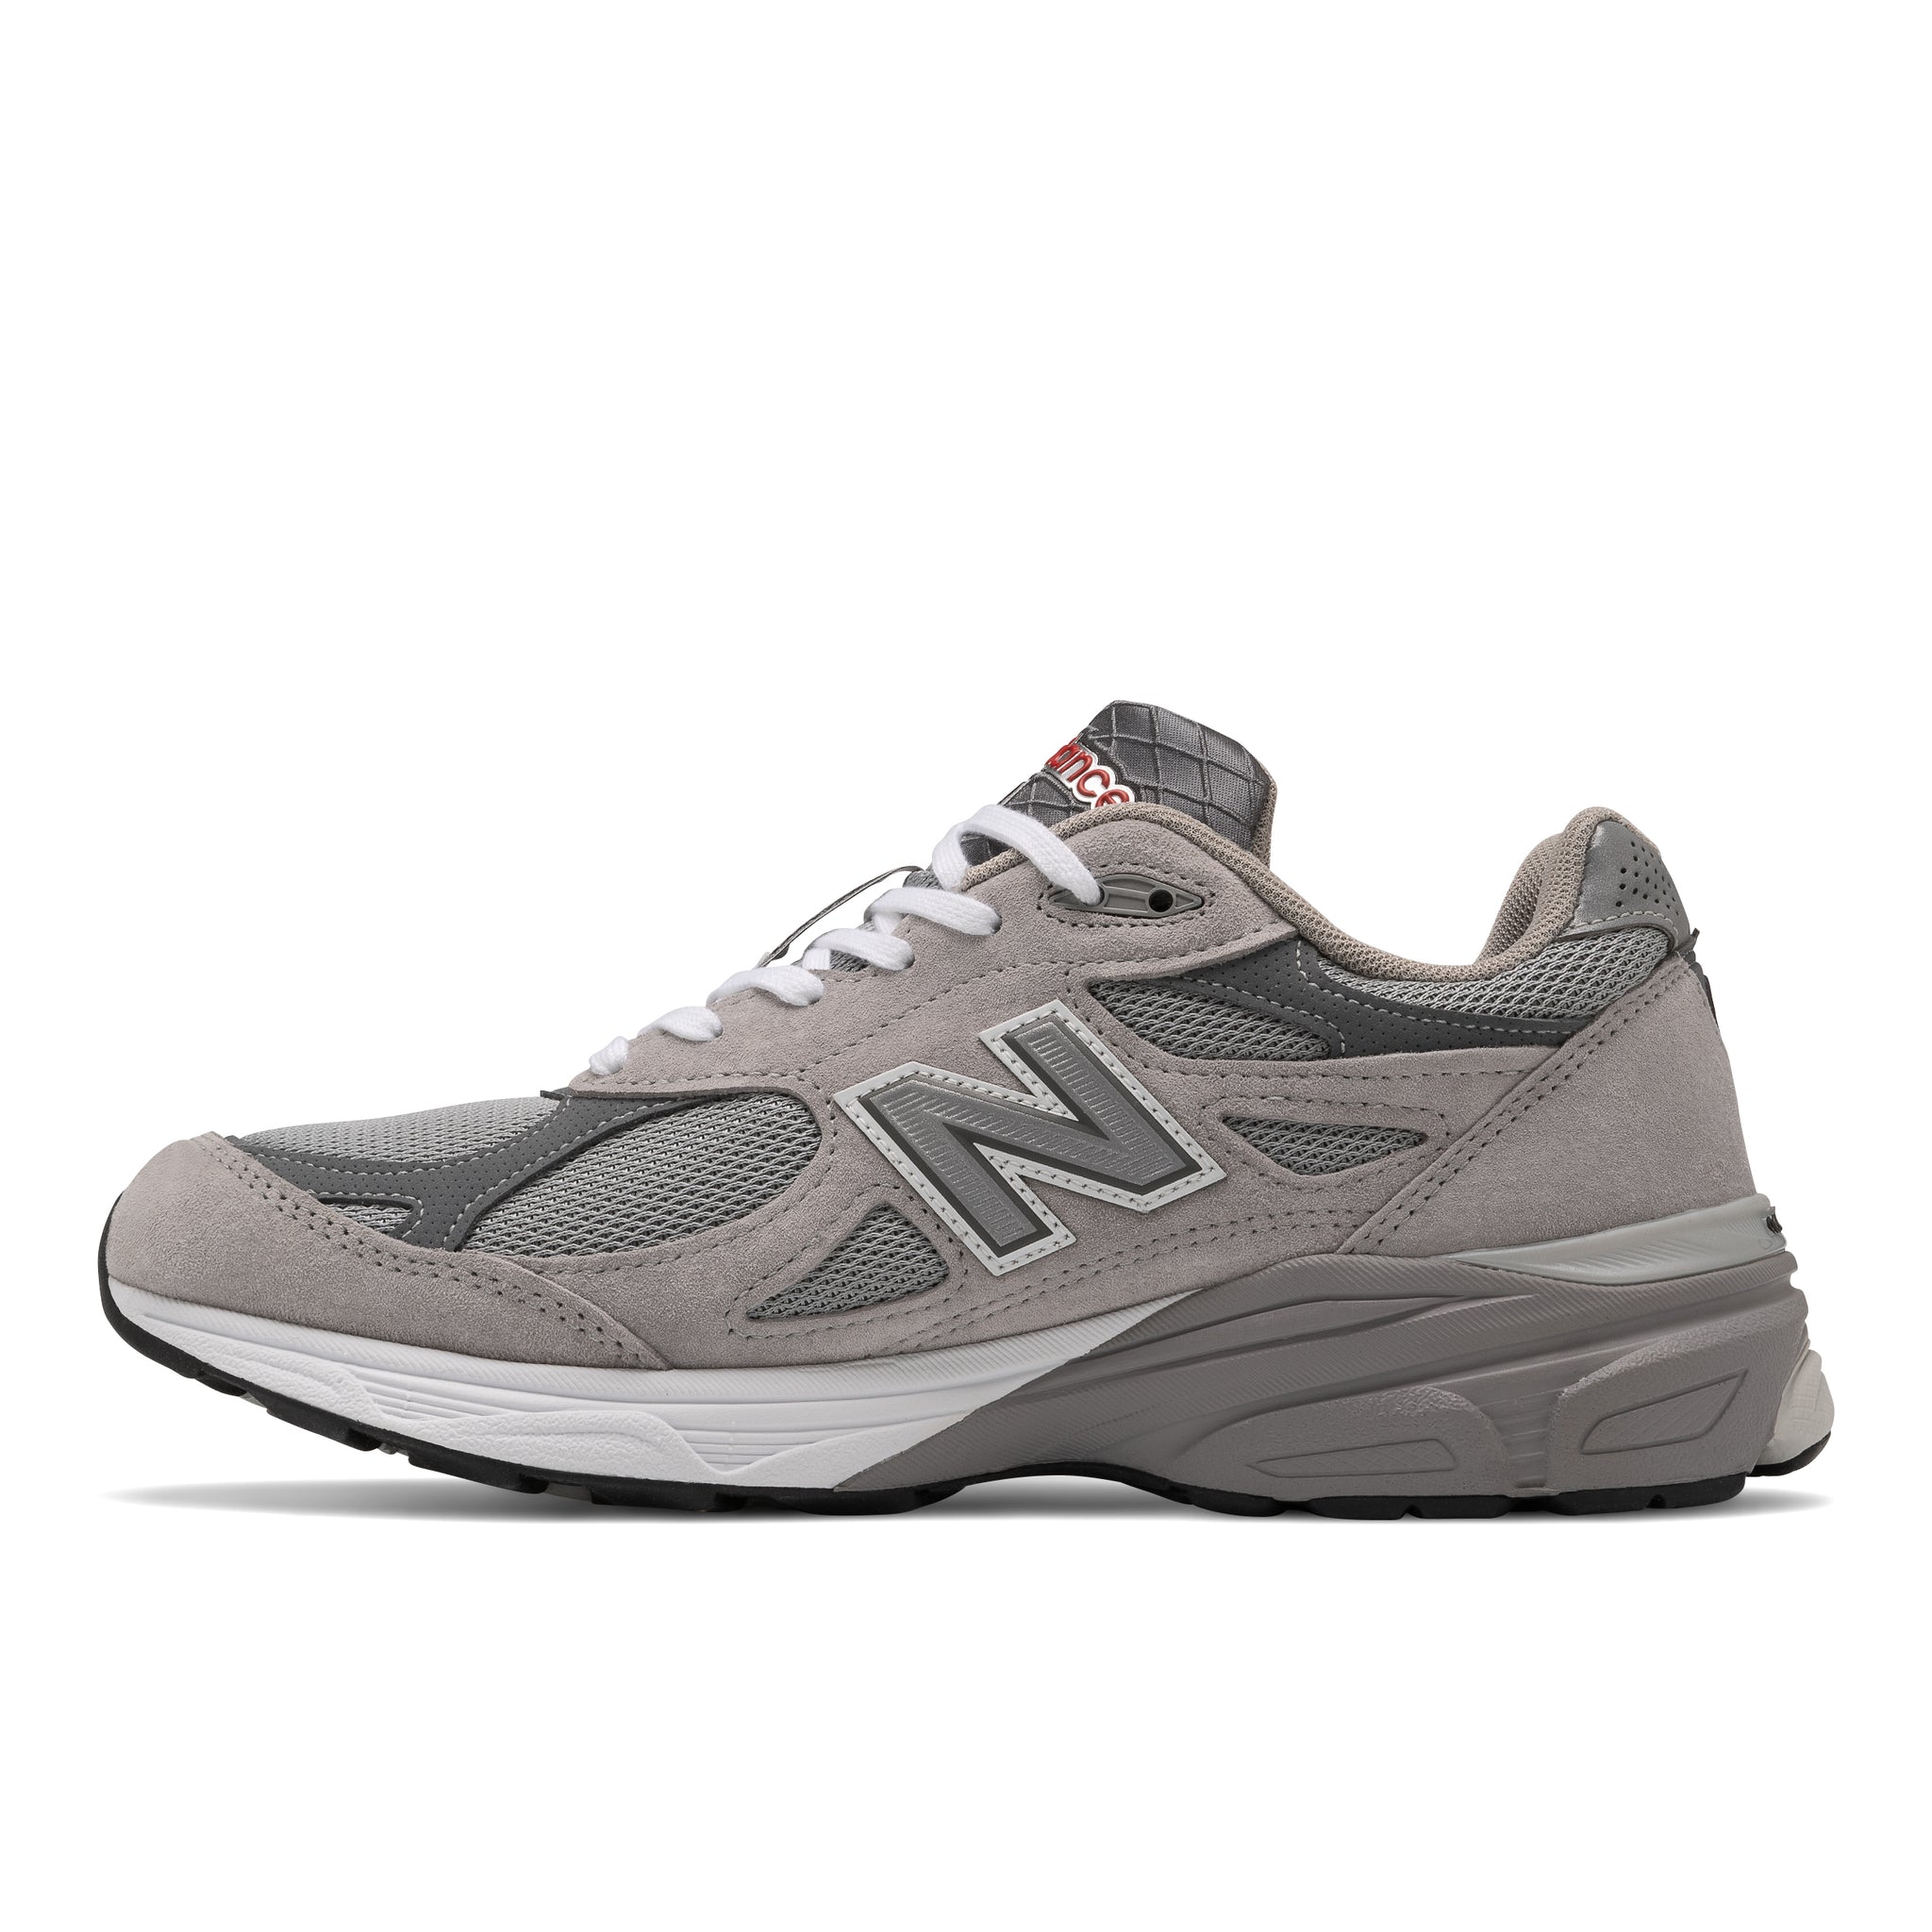 NEW BALANCE M990GY3 - GREY MADE IN THE USA – ES2